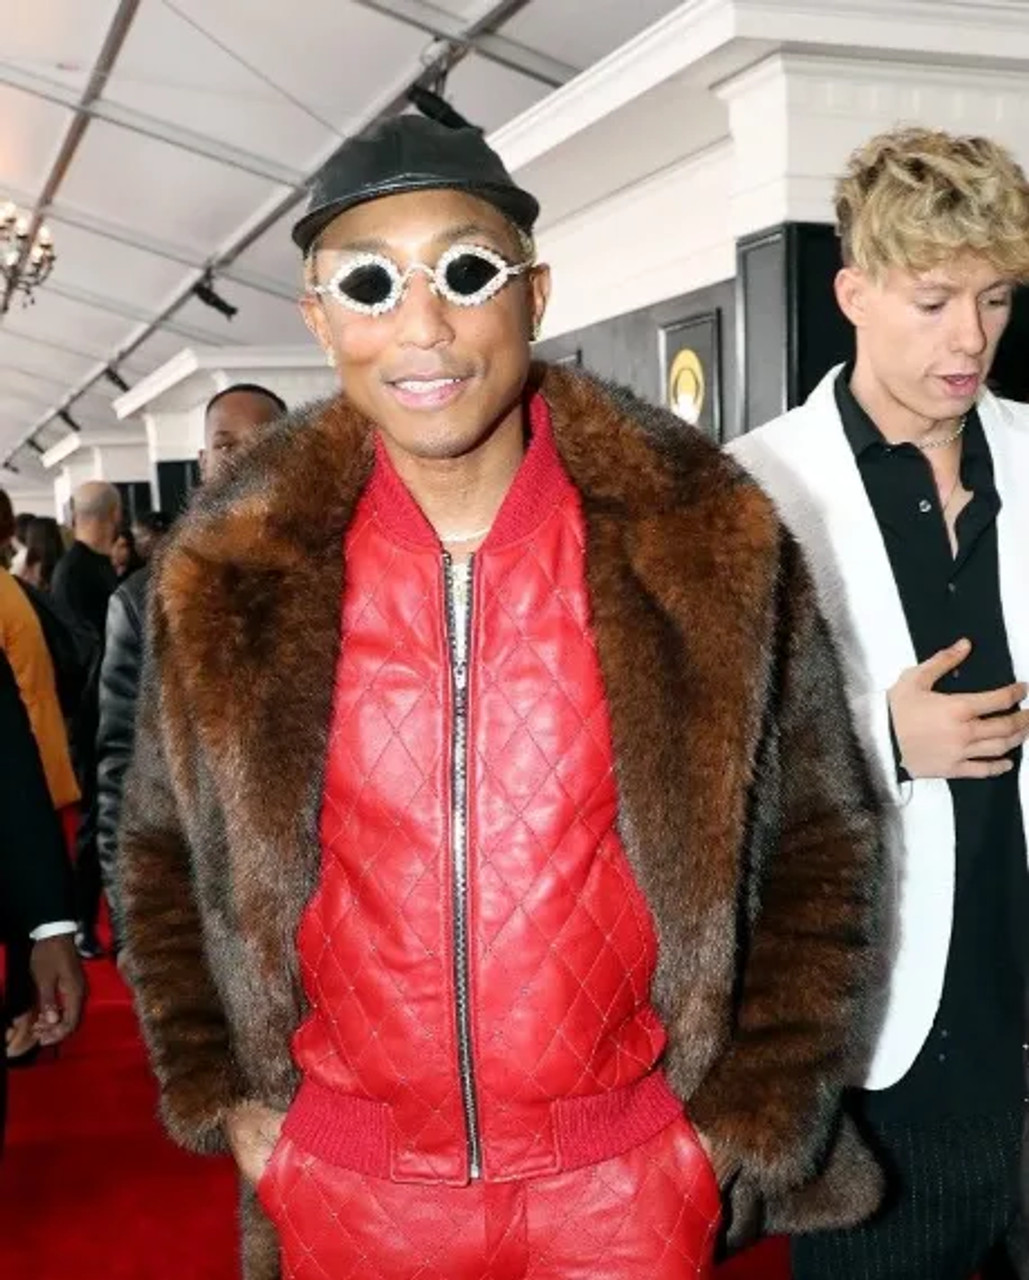 Best Pharrell Outfits